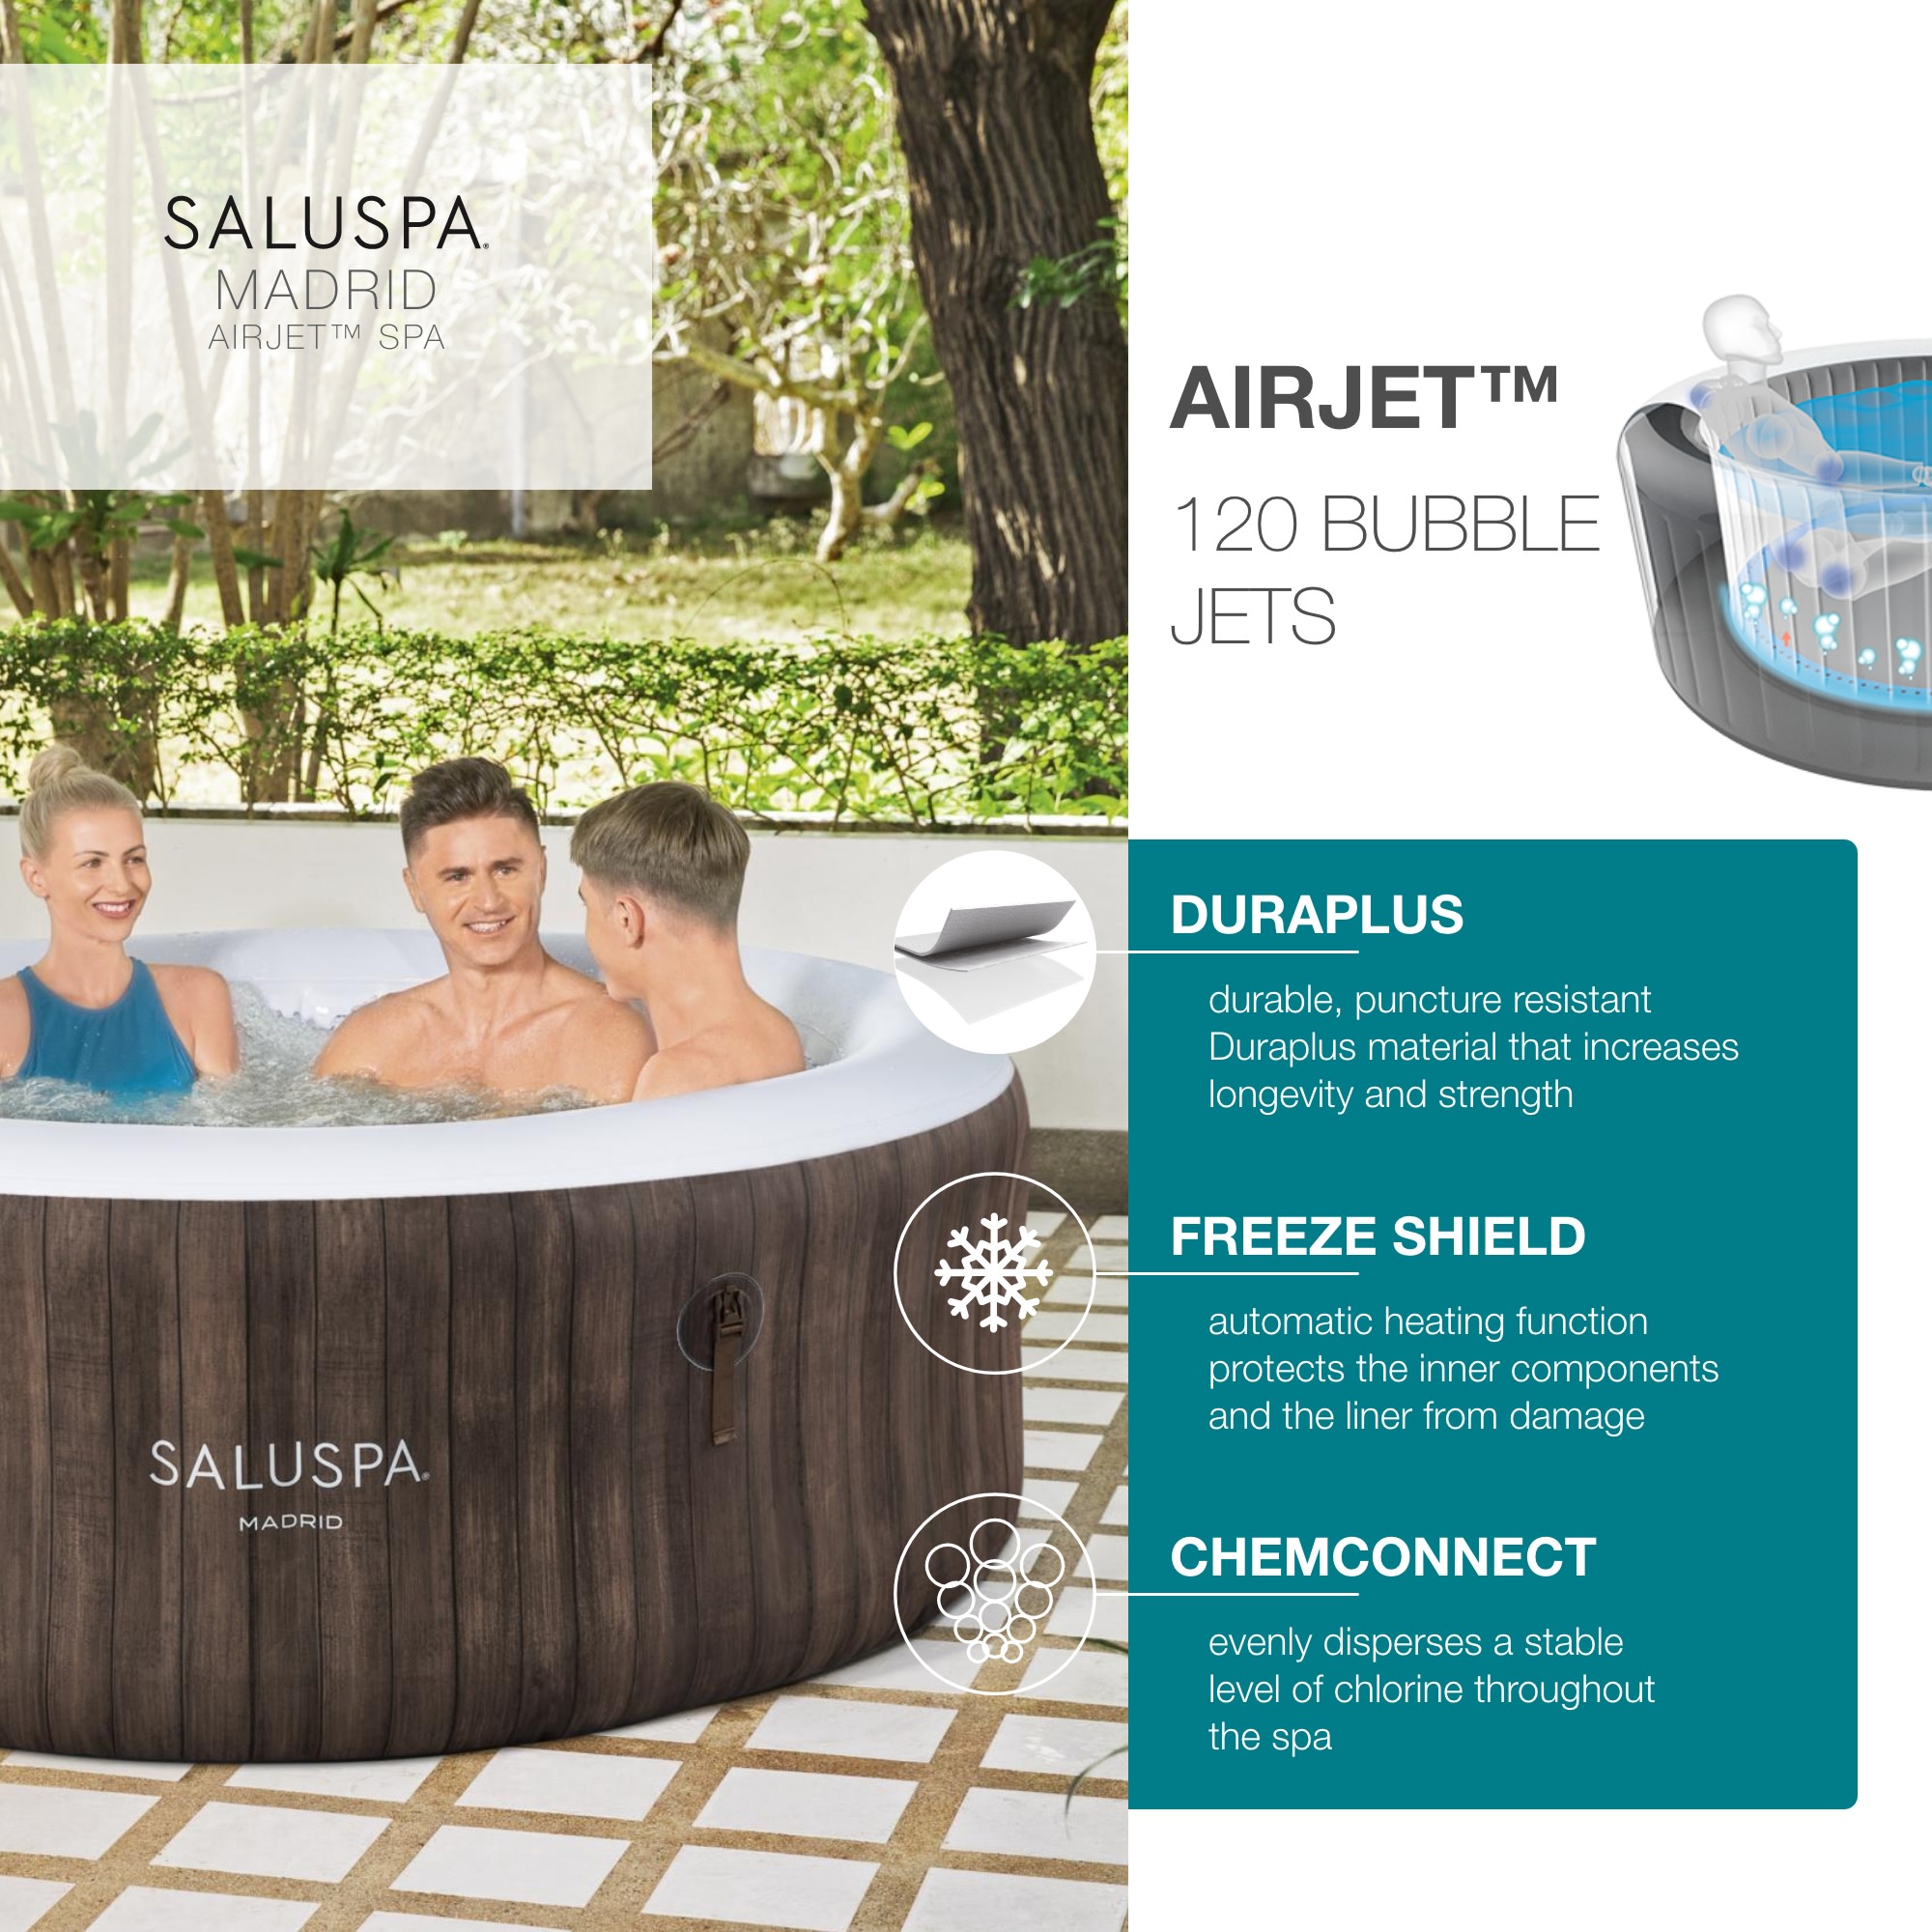 Bestway SaluSpa 71 in. x 26 in. Madrid 177 Gal Inflatable Hot Tub, 104˚F Max Temperature - image 7 of 9